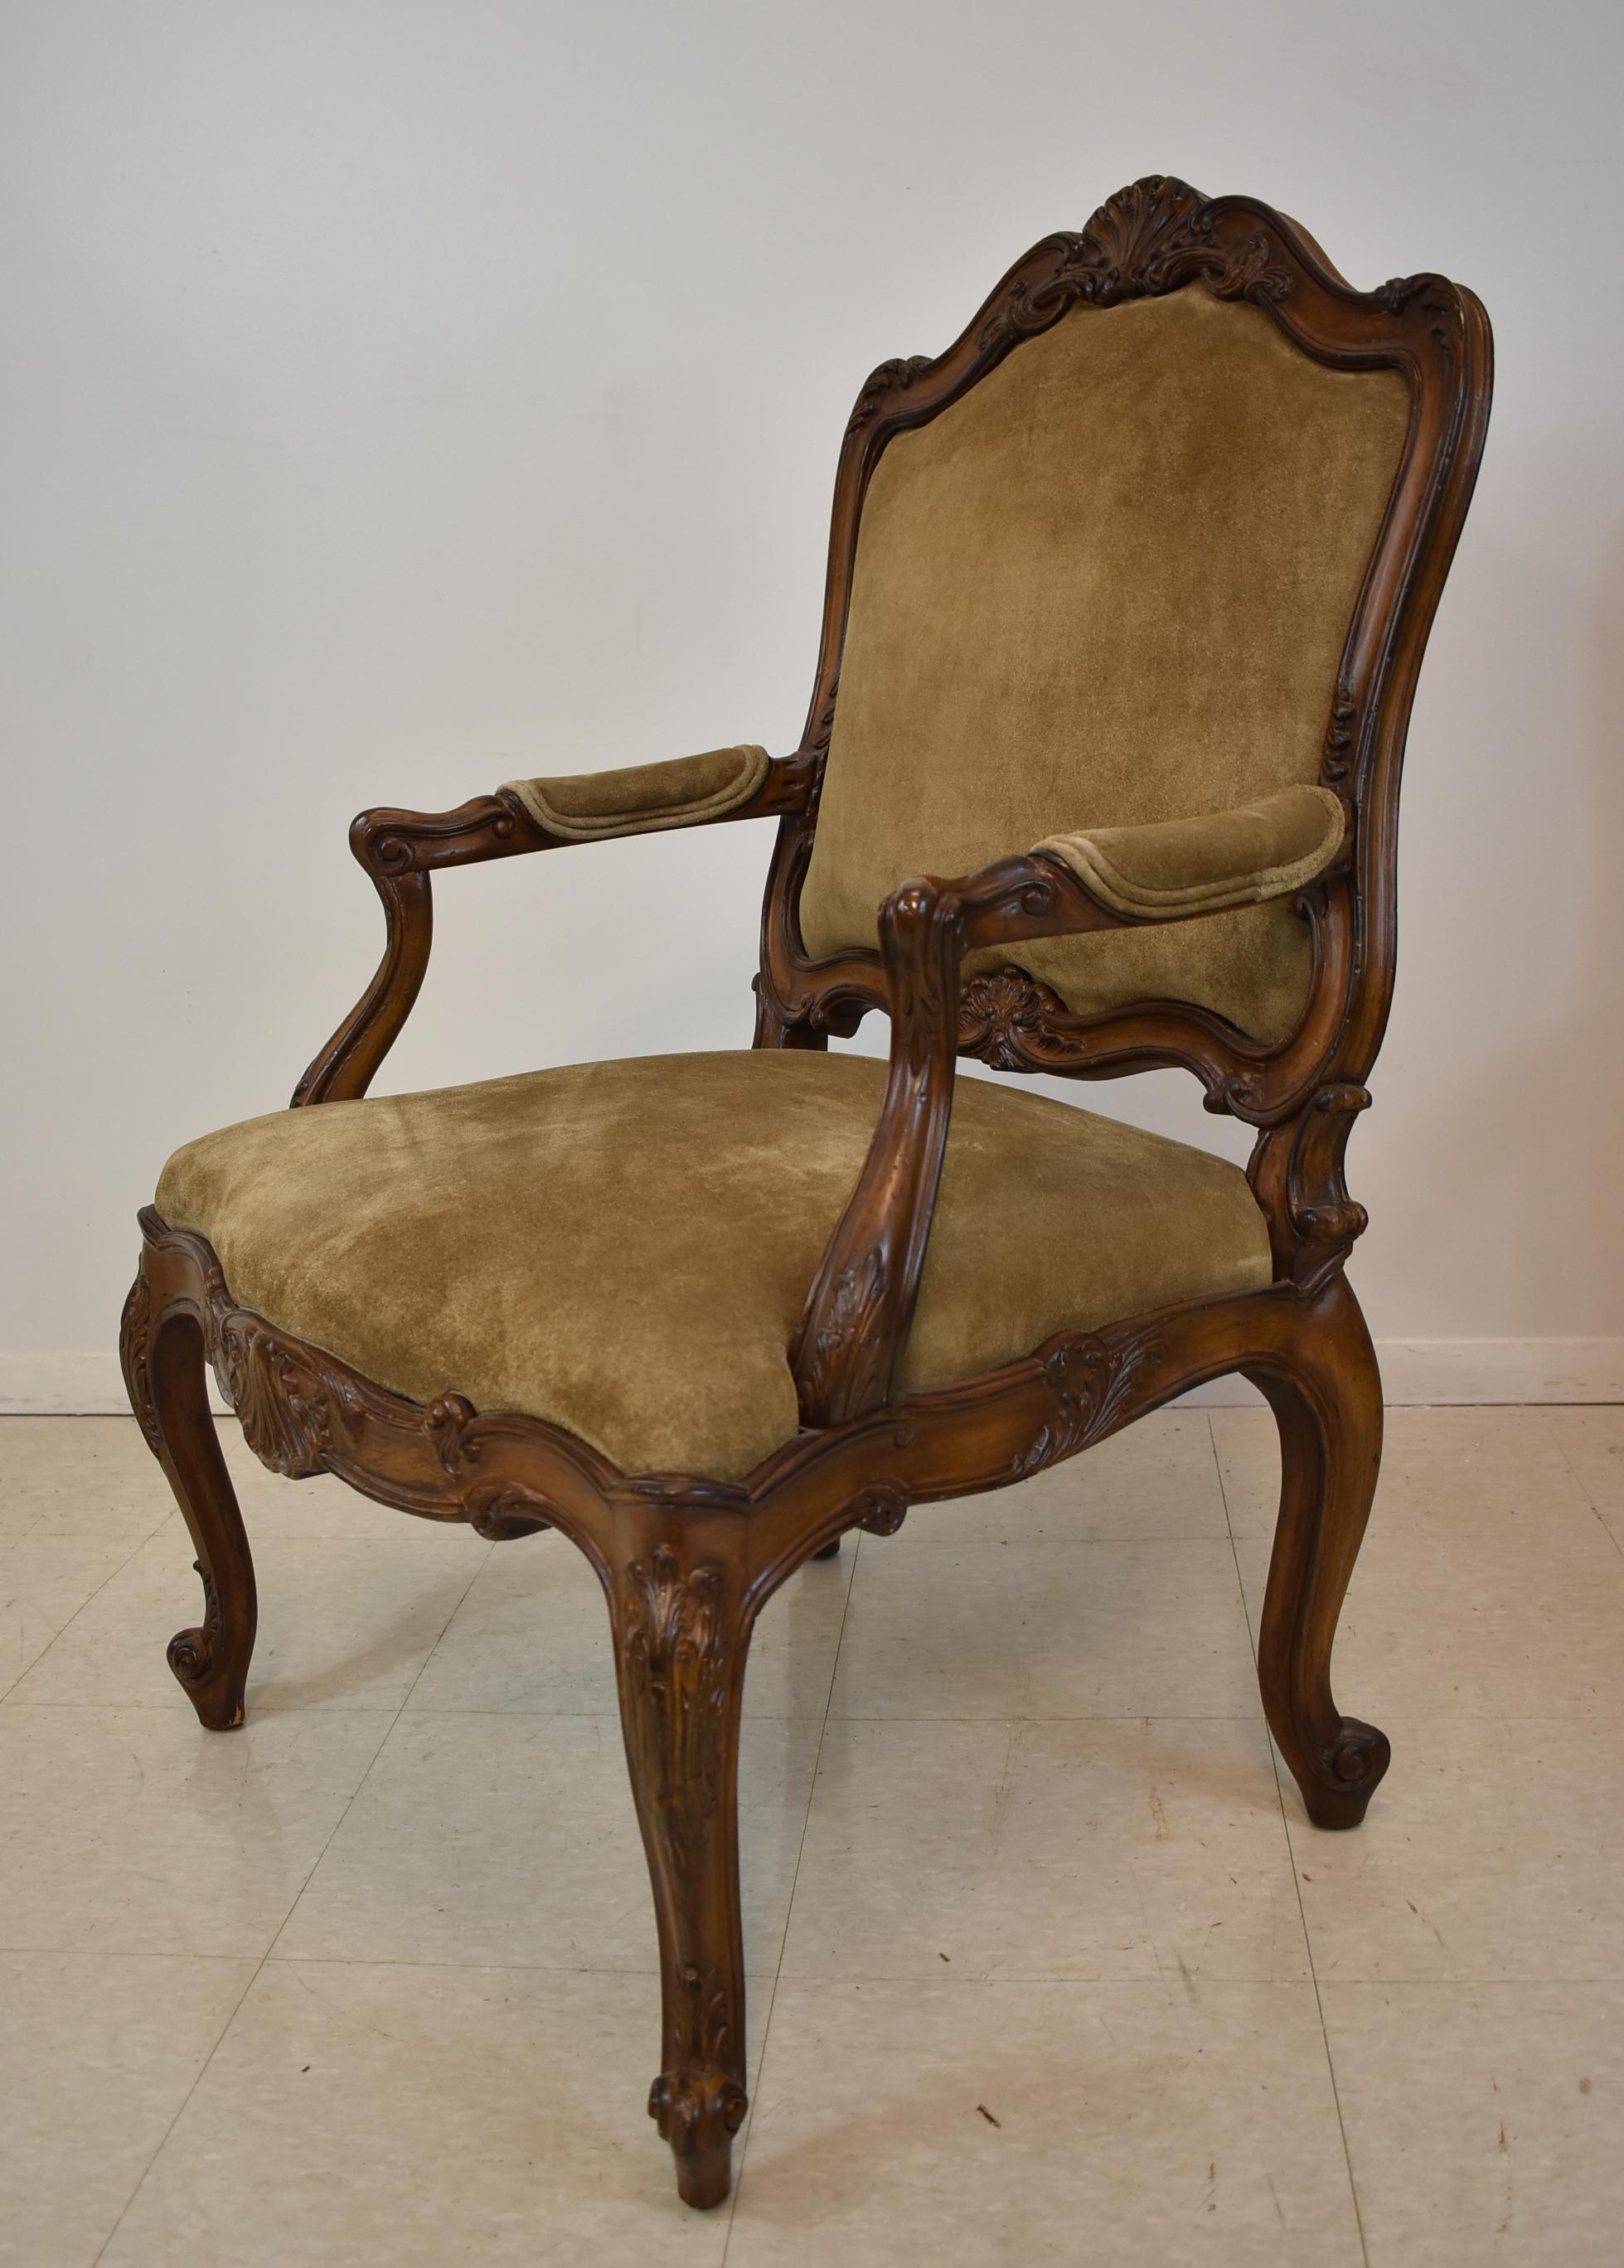 Pair of French carved wood armchairs with suede upholstery.